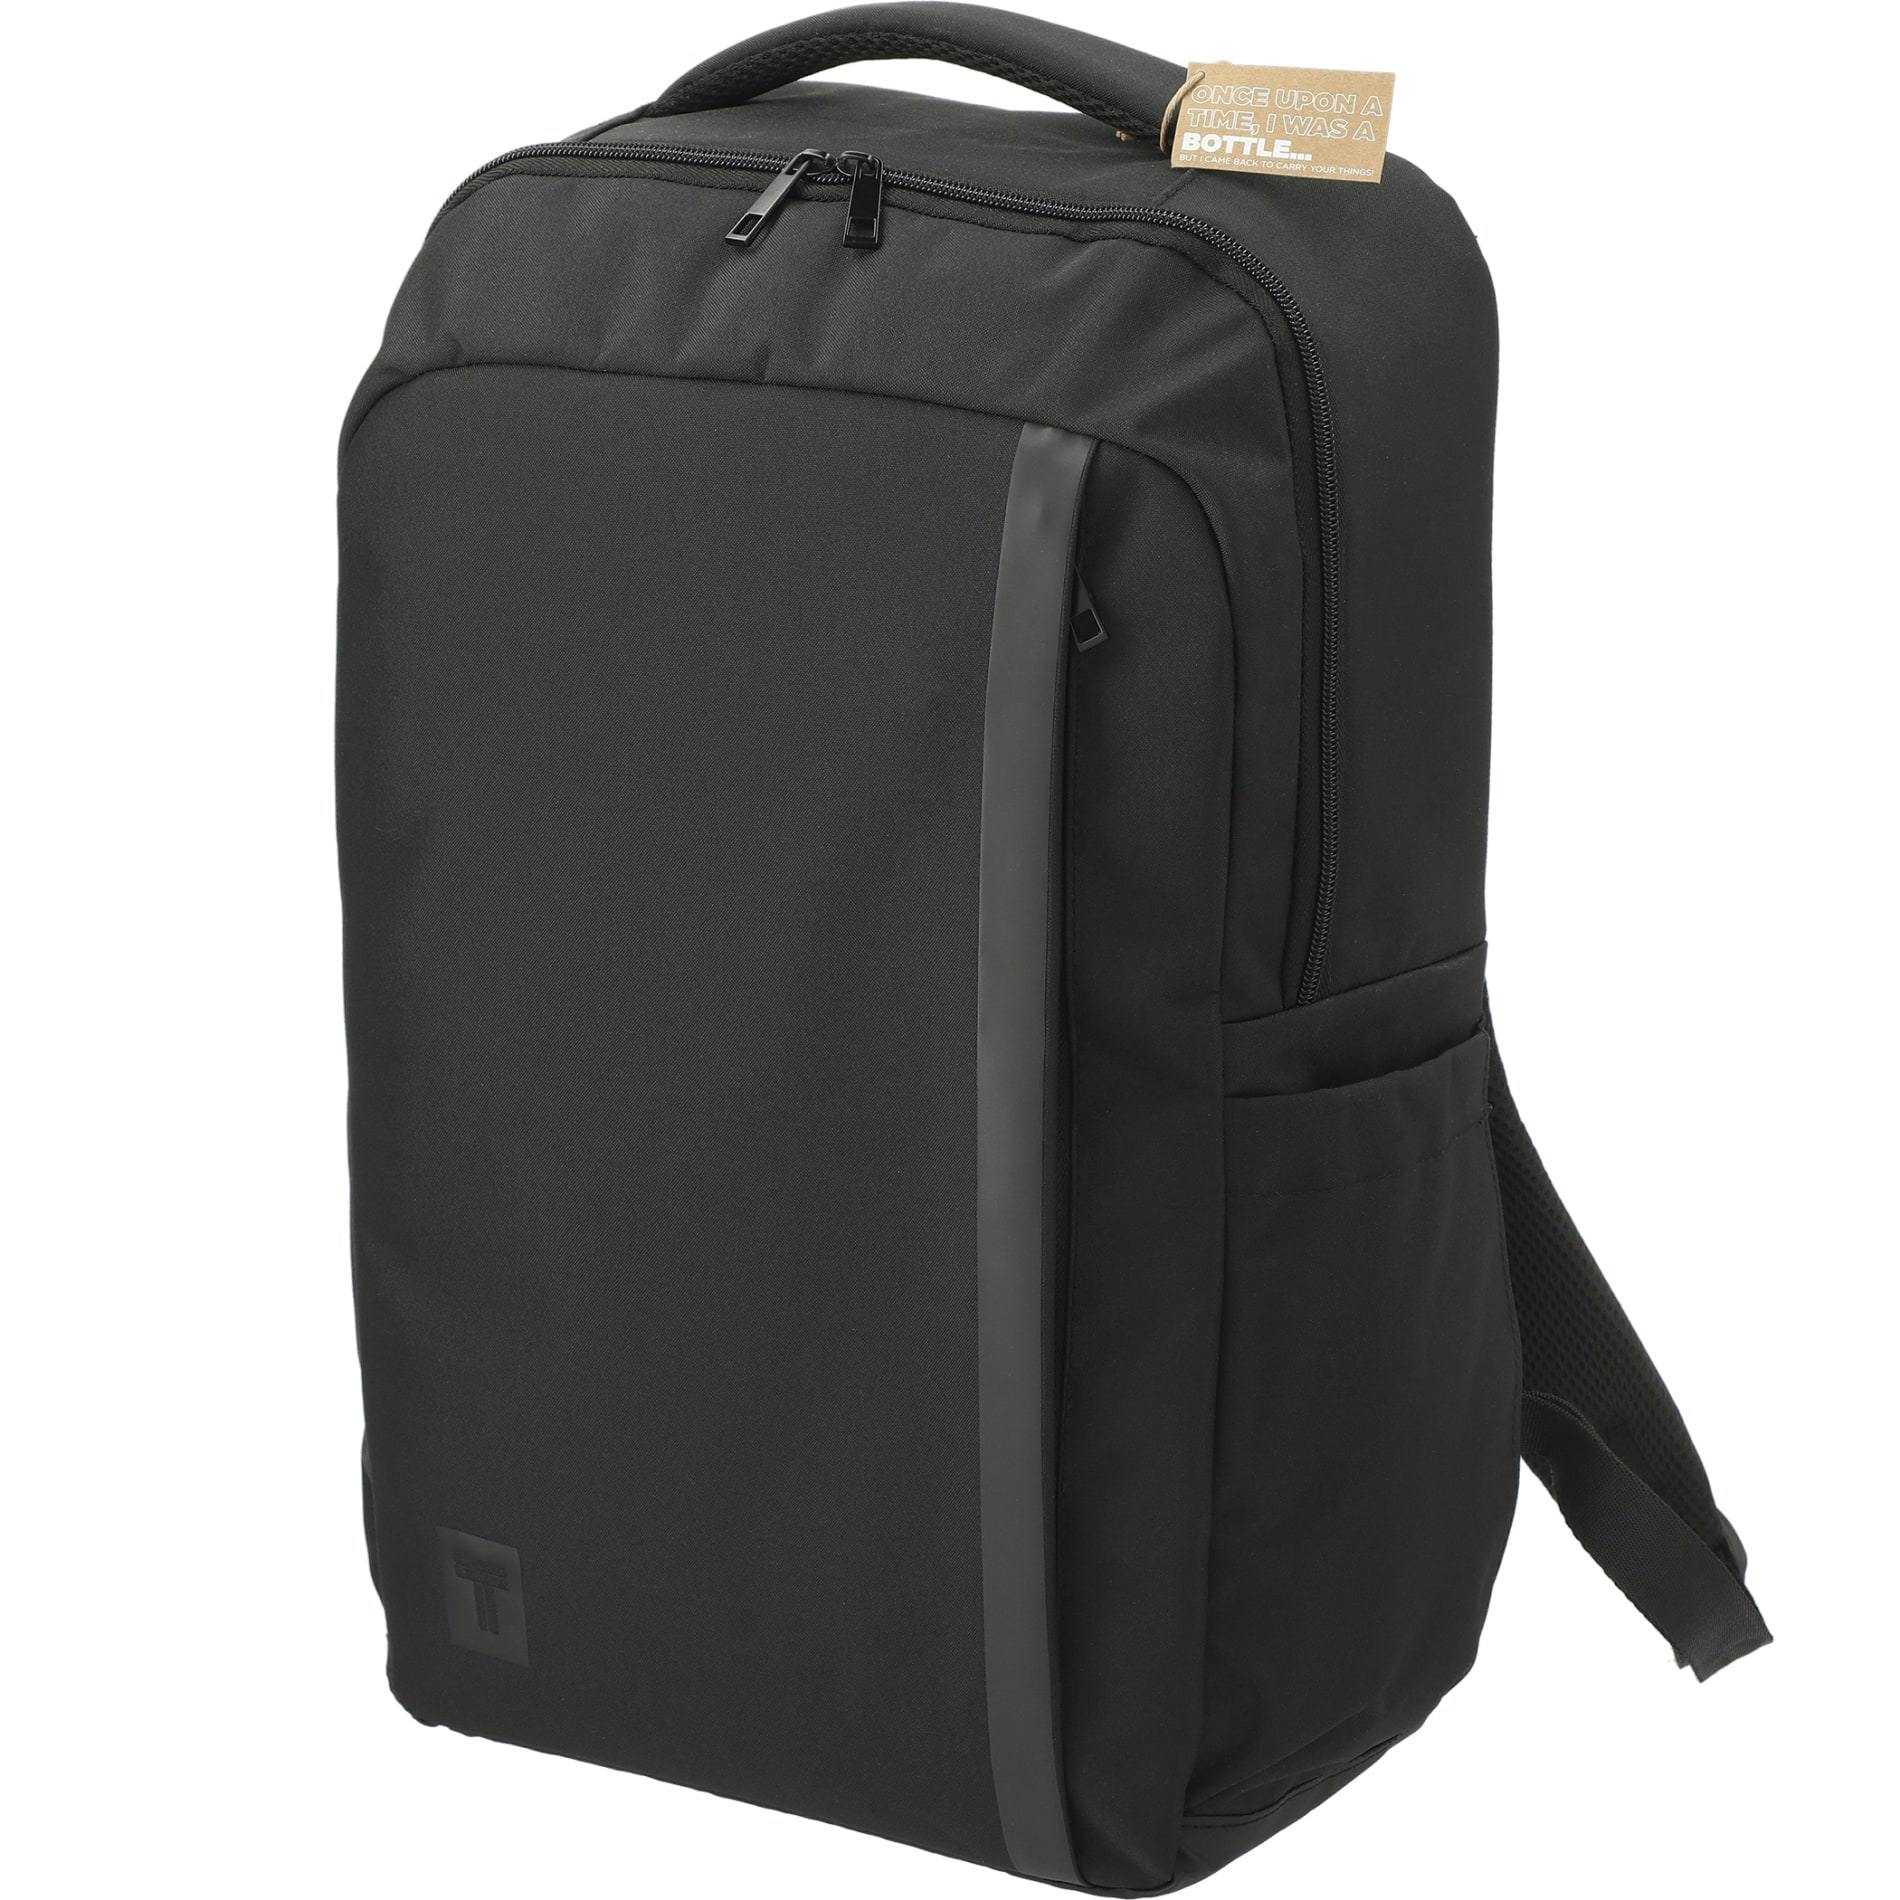 Tranzip Recycled 17" Computer Backpack - additional Image 6